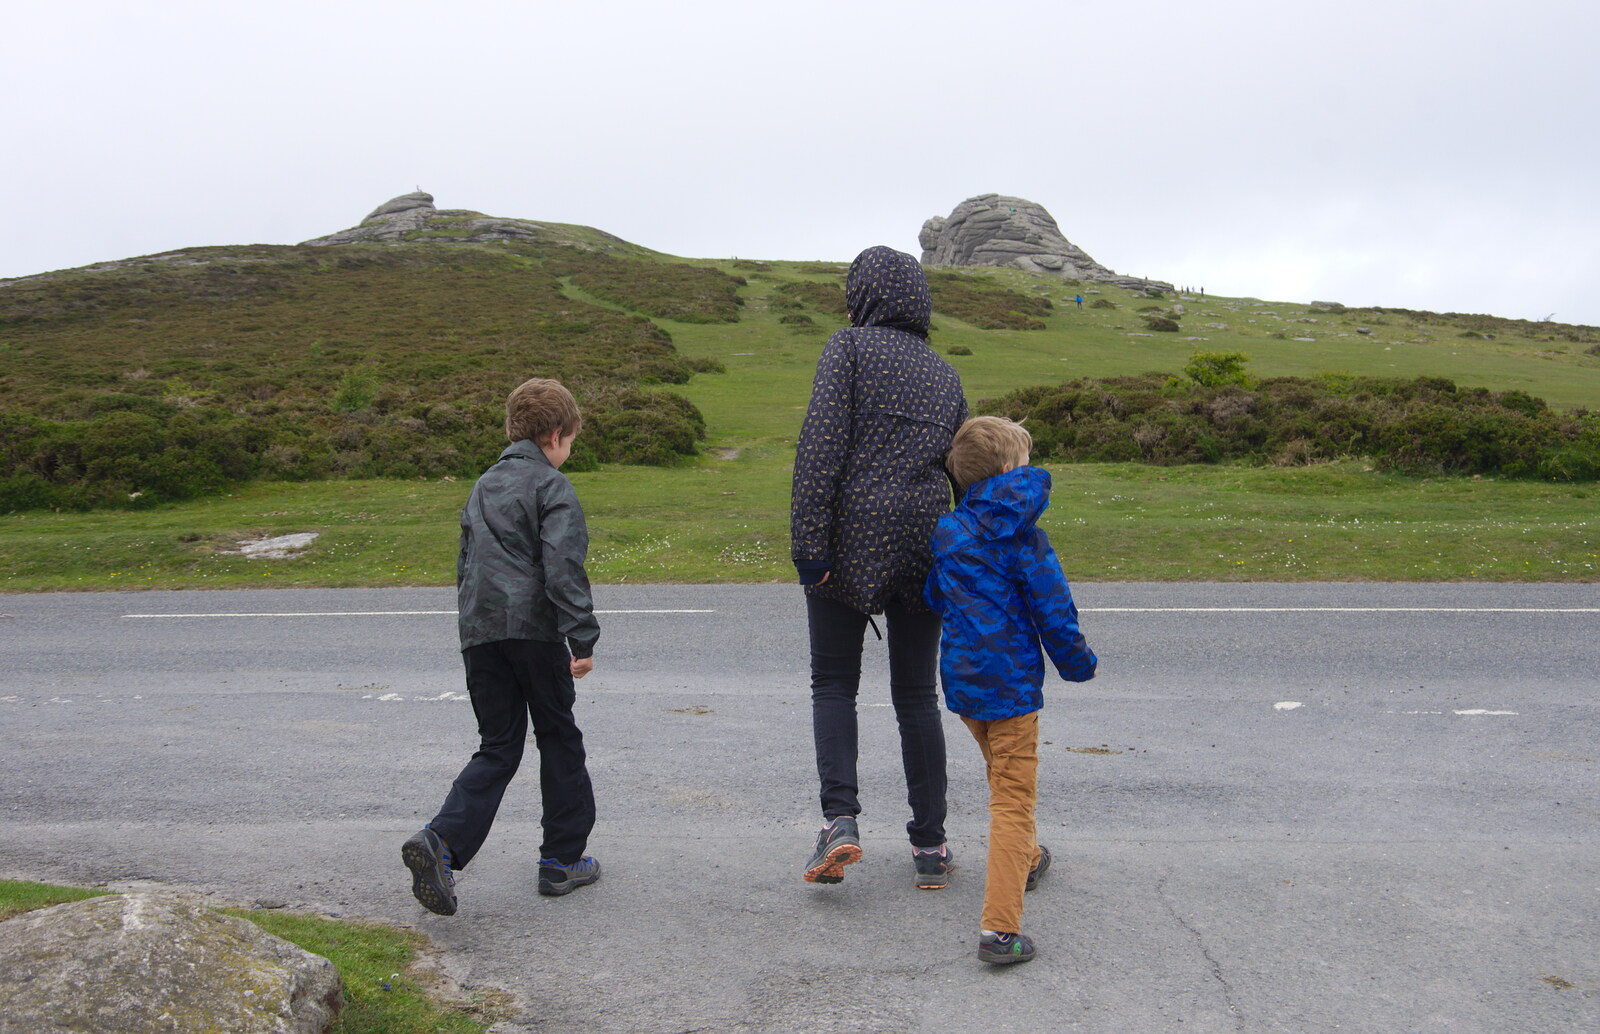 We head off up Hay Tor from The Tom Cobley and a Return to Haytor, Bovey Tracey, Devon - 27th May 2019